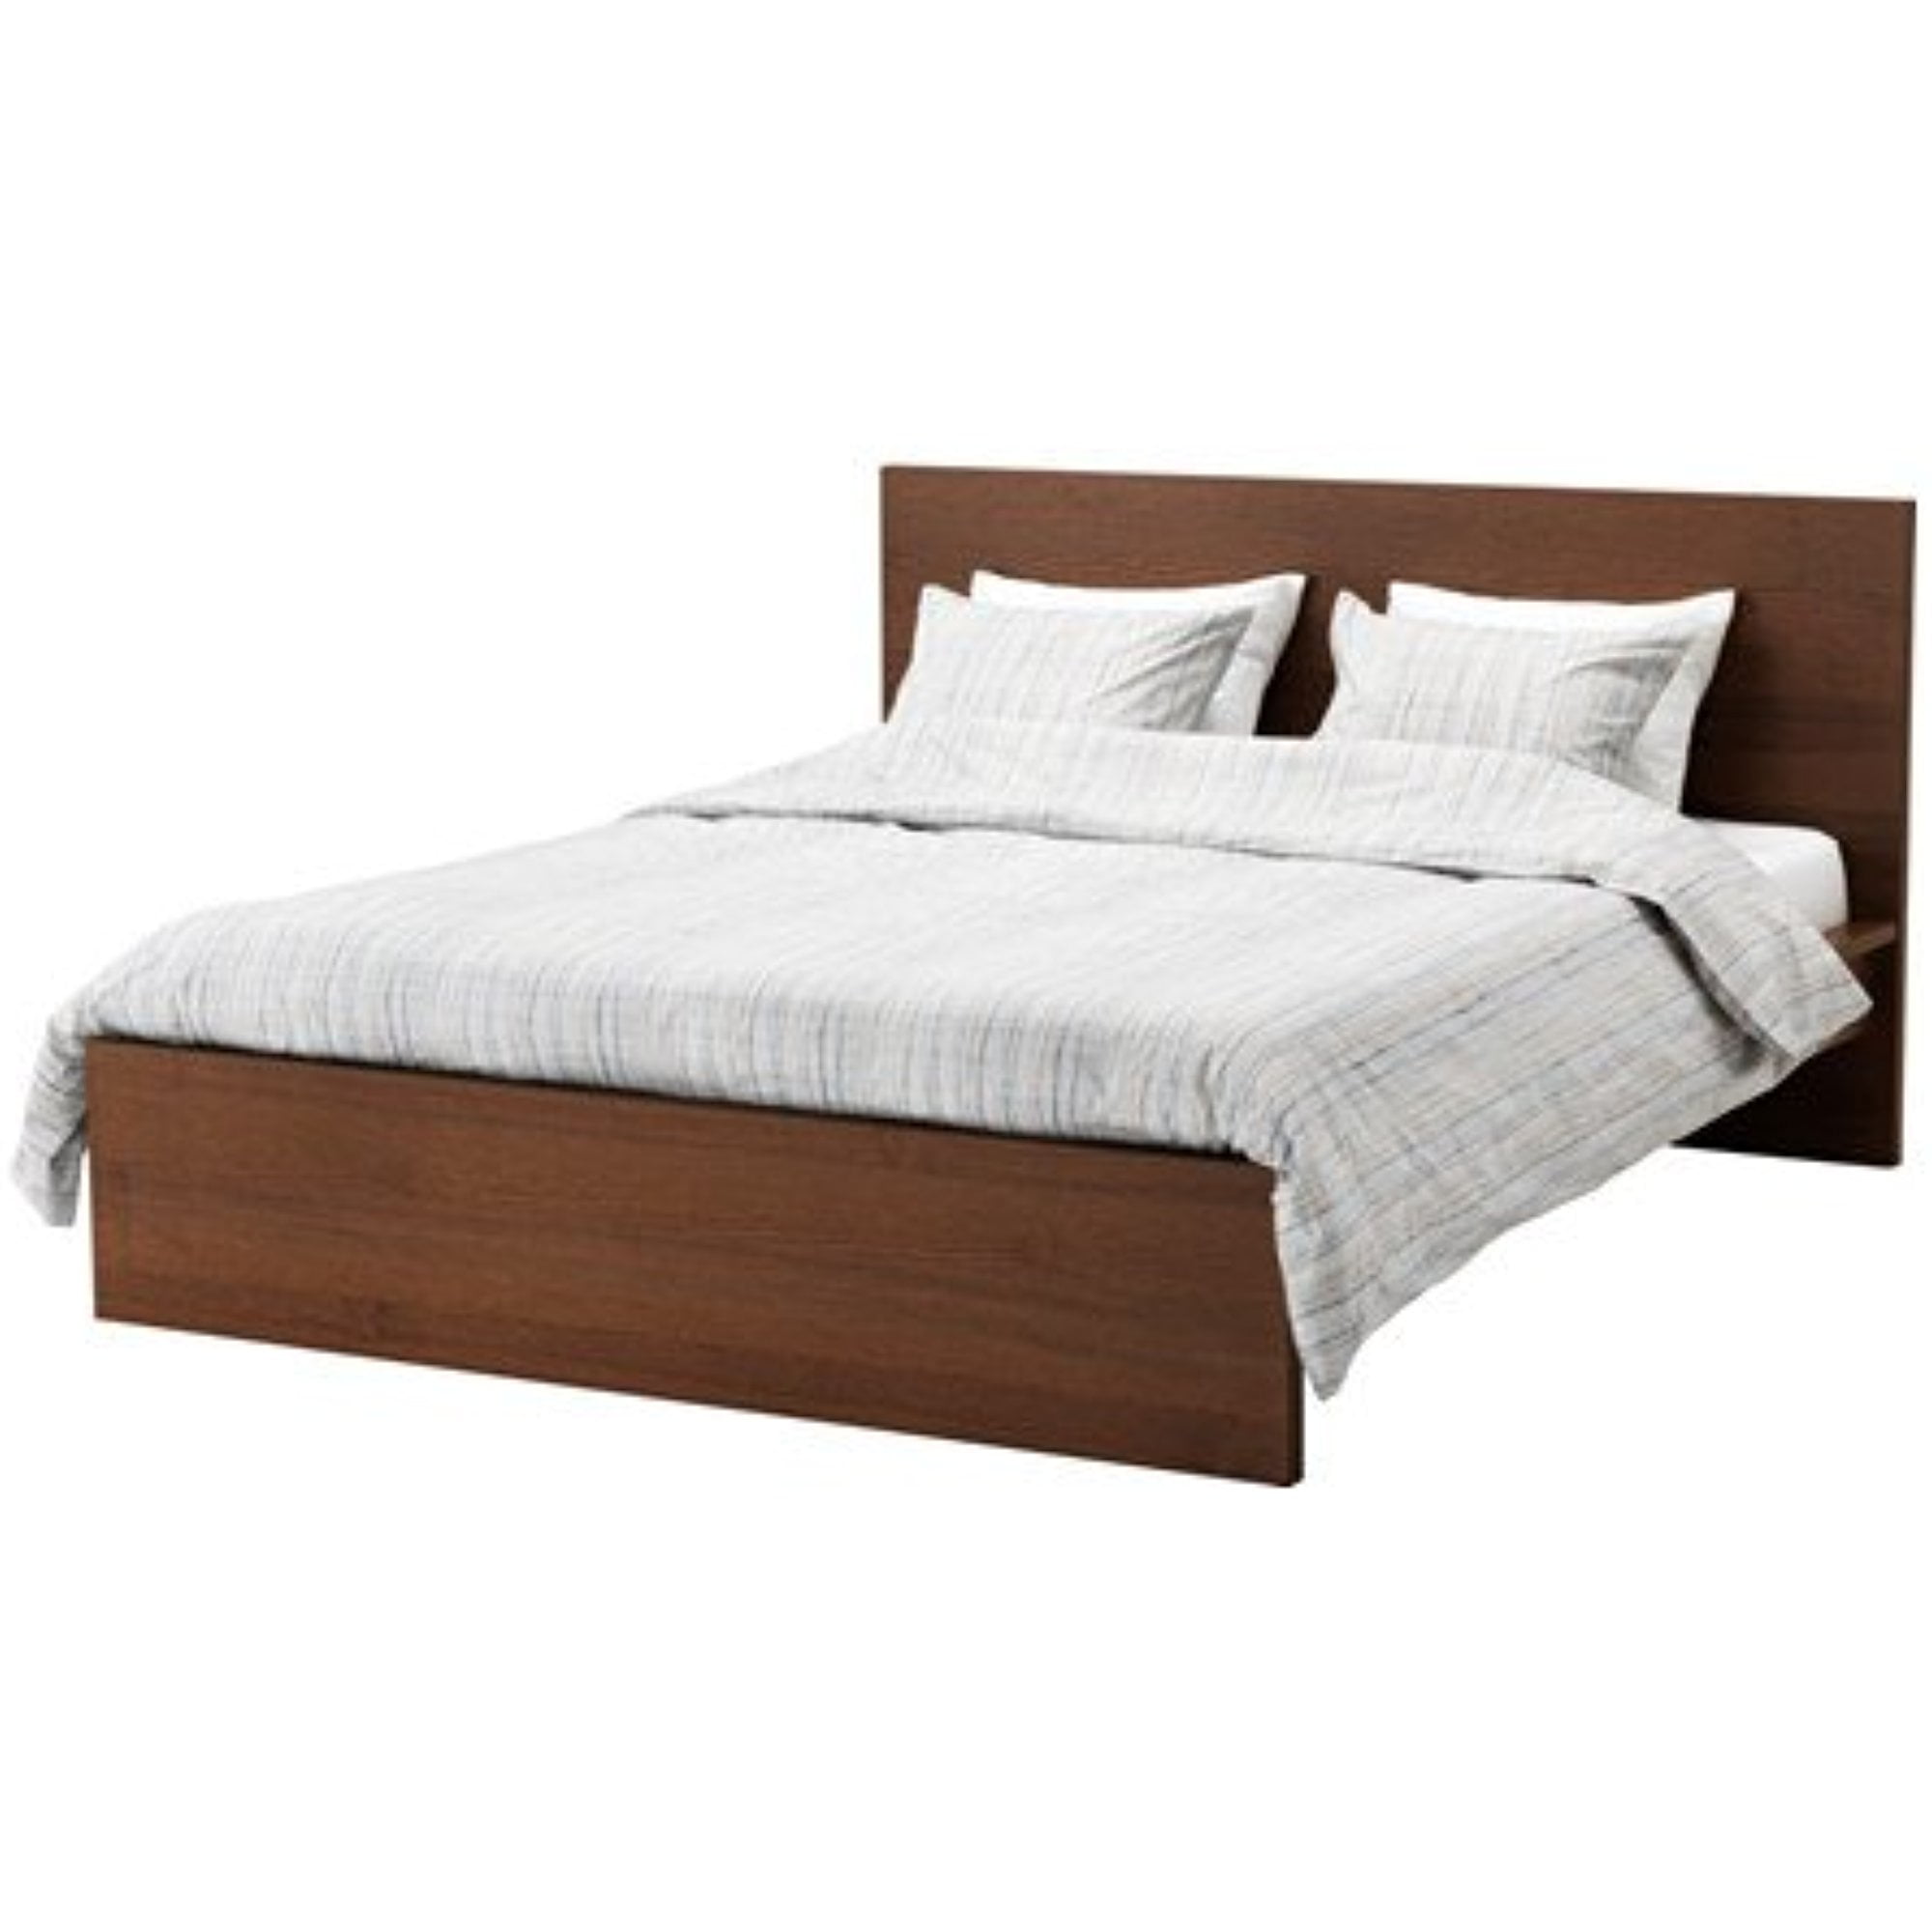 Ikea Queen Size Bed frame, high, brown stained ash veneer, Leirsund